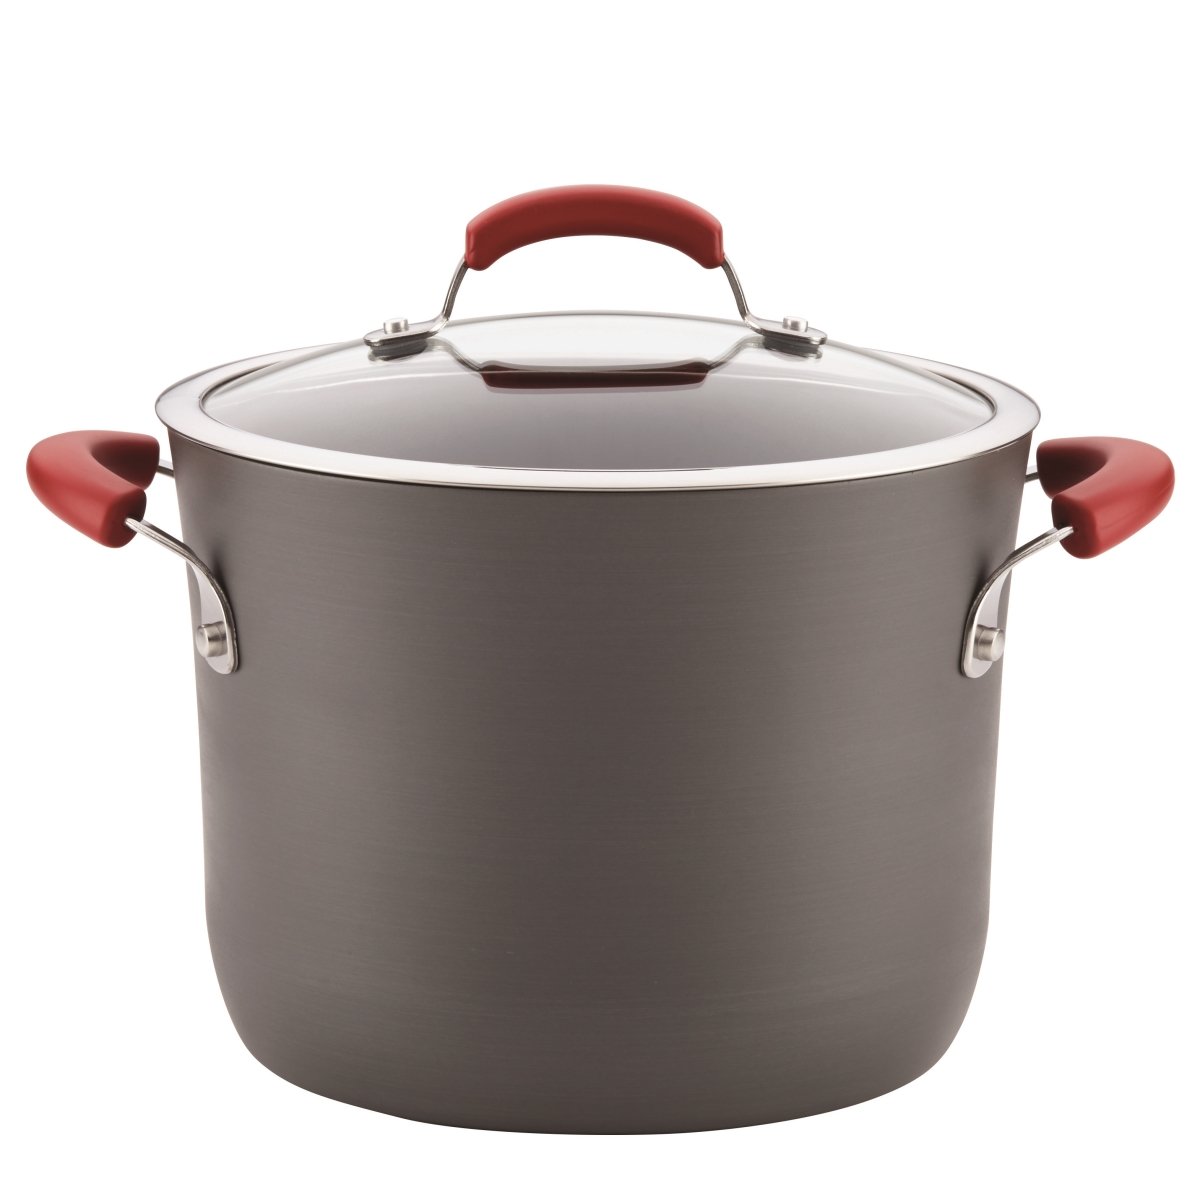 82722 8 Qt. Gray With Handles Hard-anodized Aluminum Nonstick Covered Stockpot